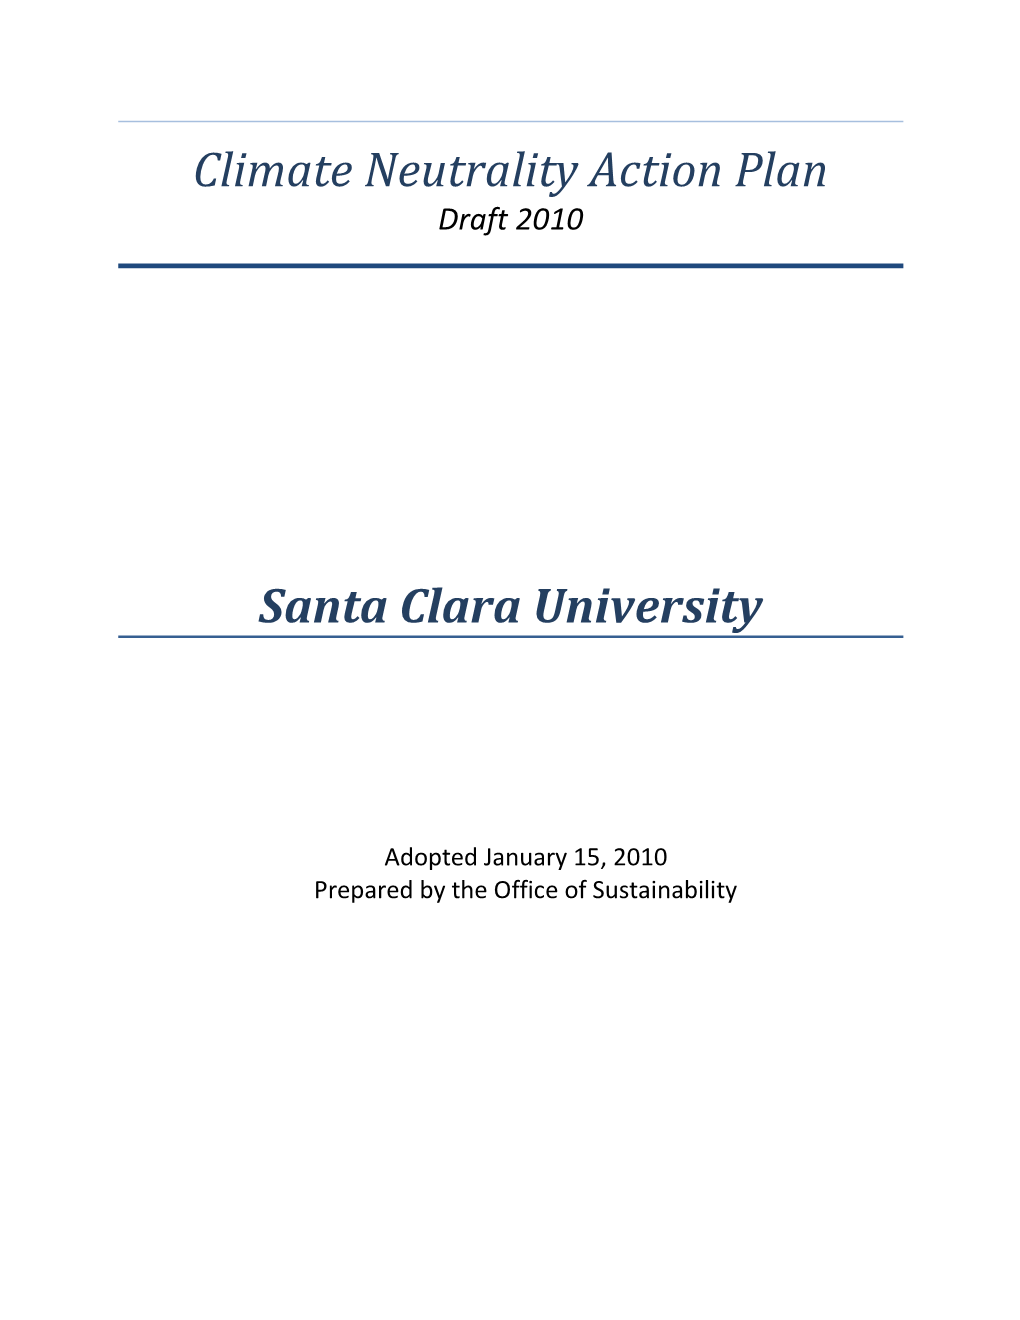 Climate Neutrality Action Plan Draft 2010